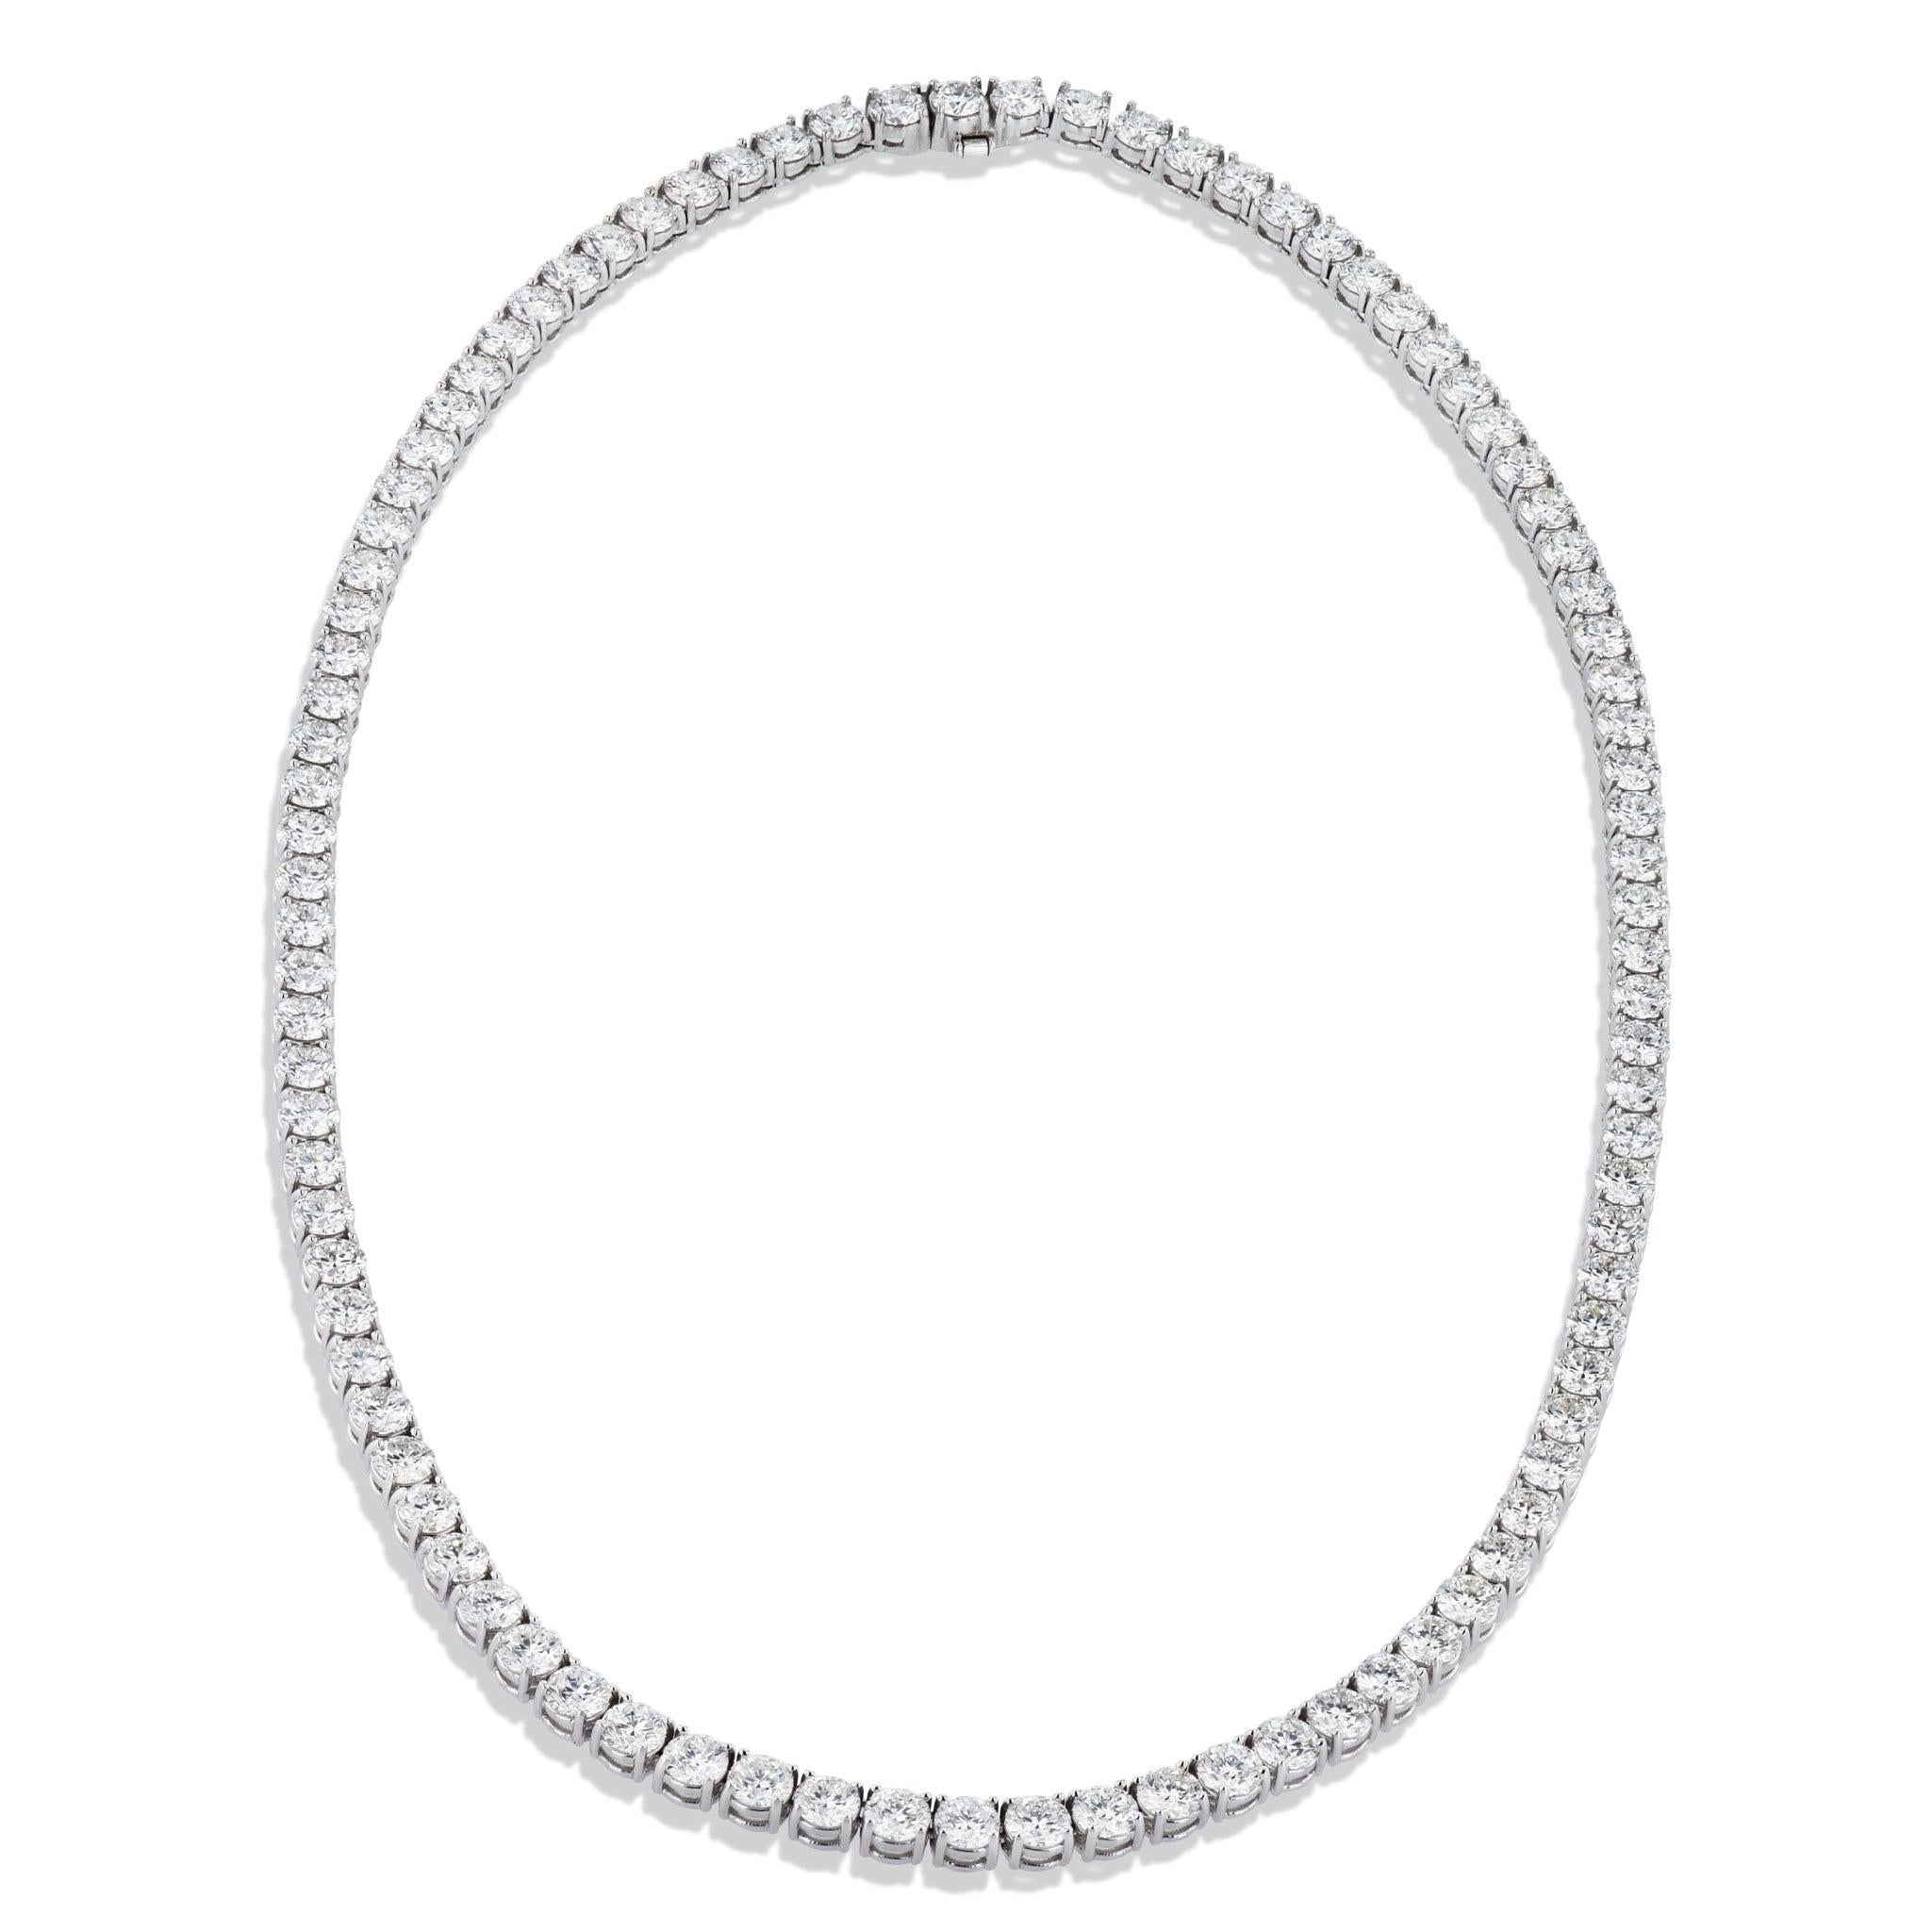 Elevate your wardrobe with an exquisite 24.47 carat Diamond White Gold Tennis Necklace! This one-of-a-kind statement necklace features 18kt. White Gold prongs set with dazzling diamonds. A gleaming 16